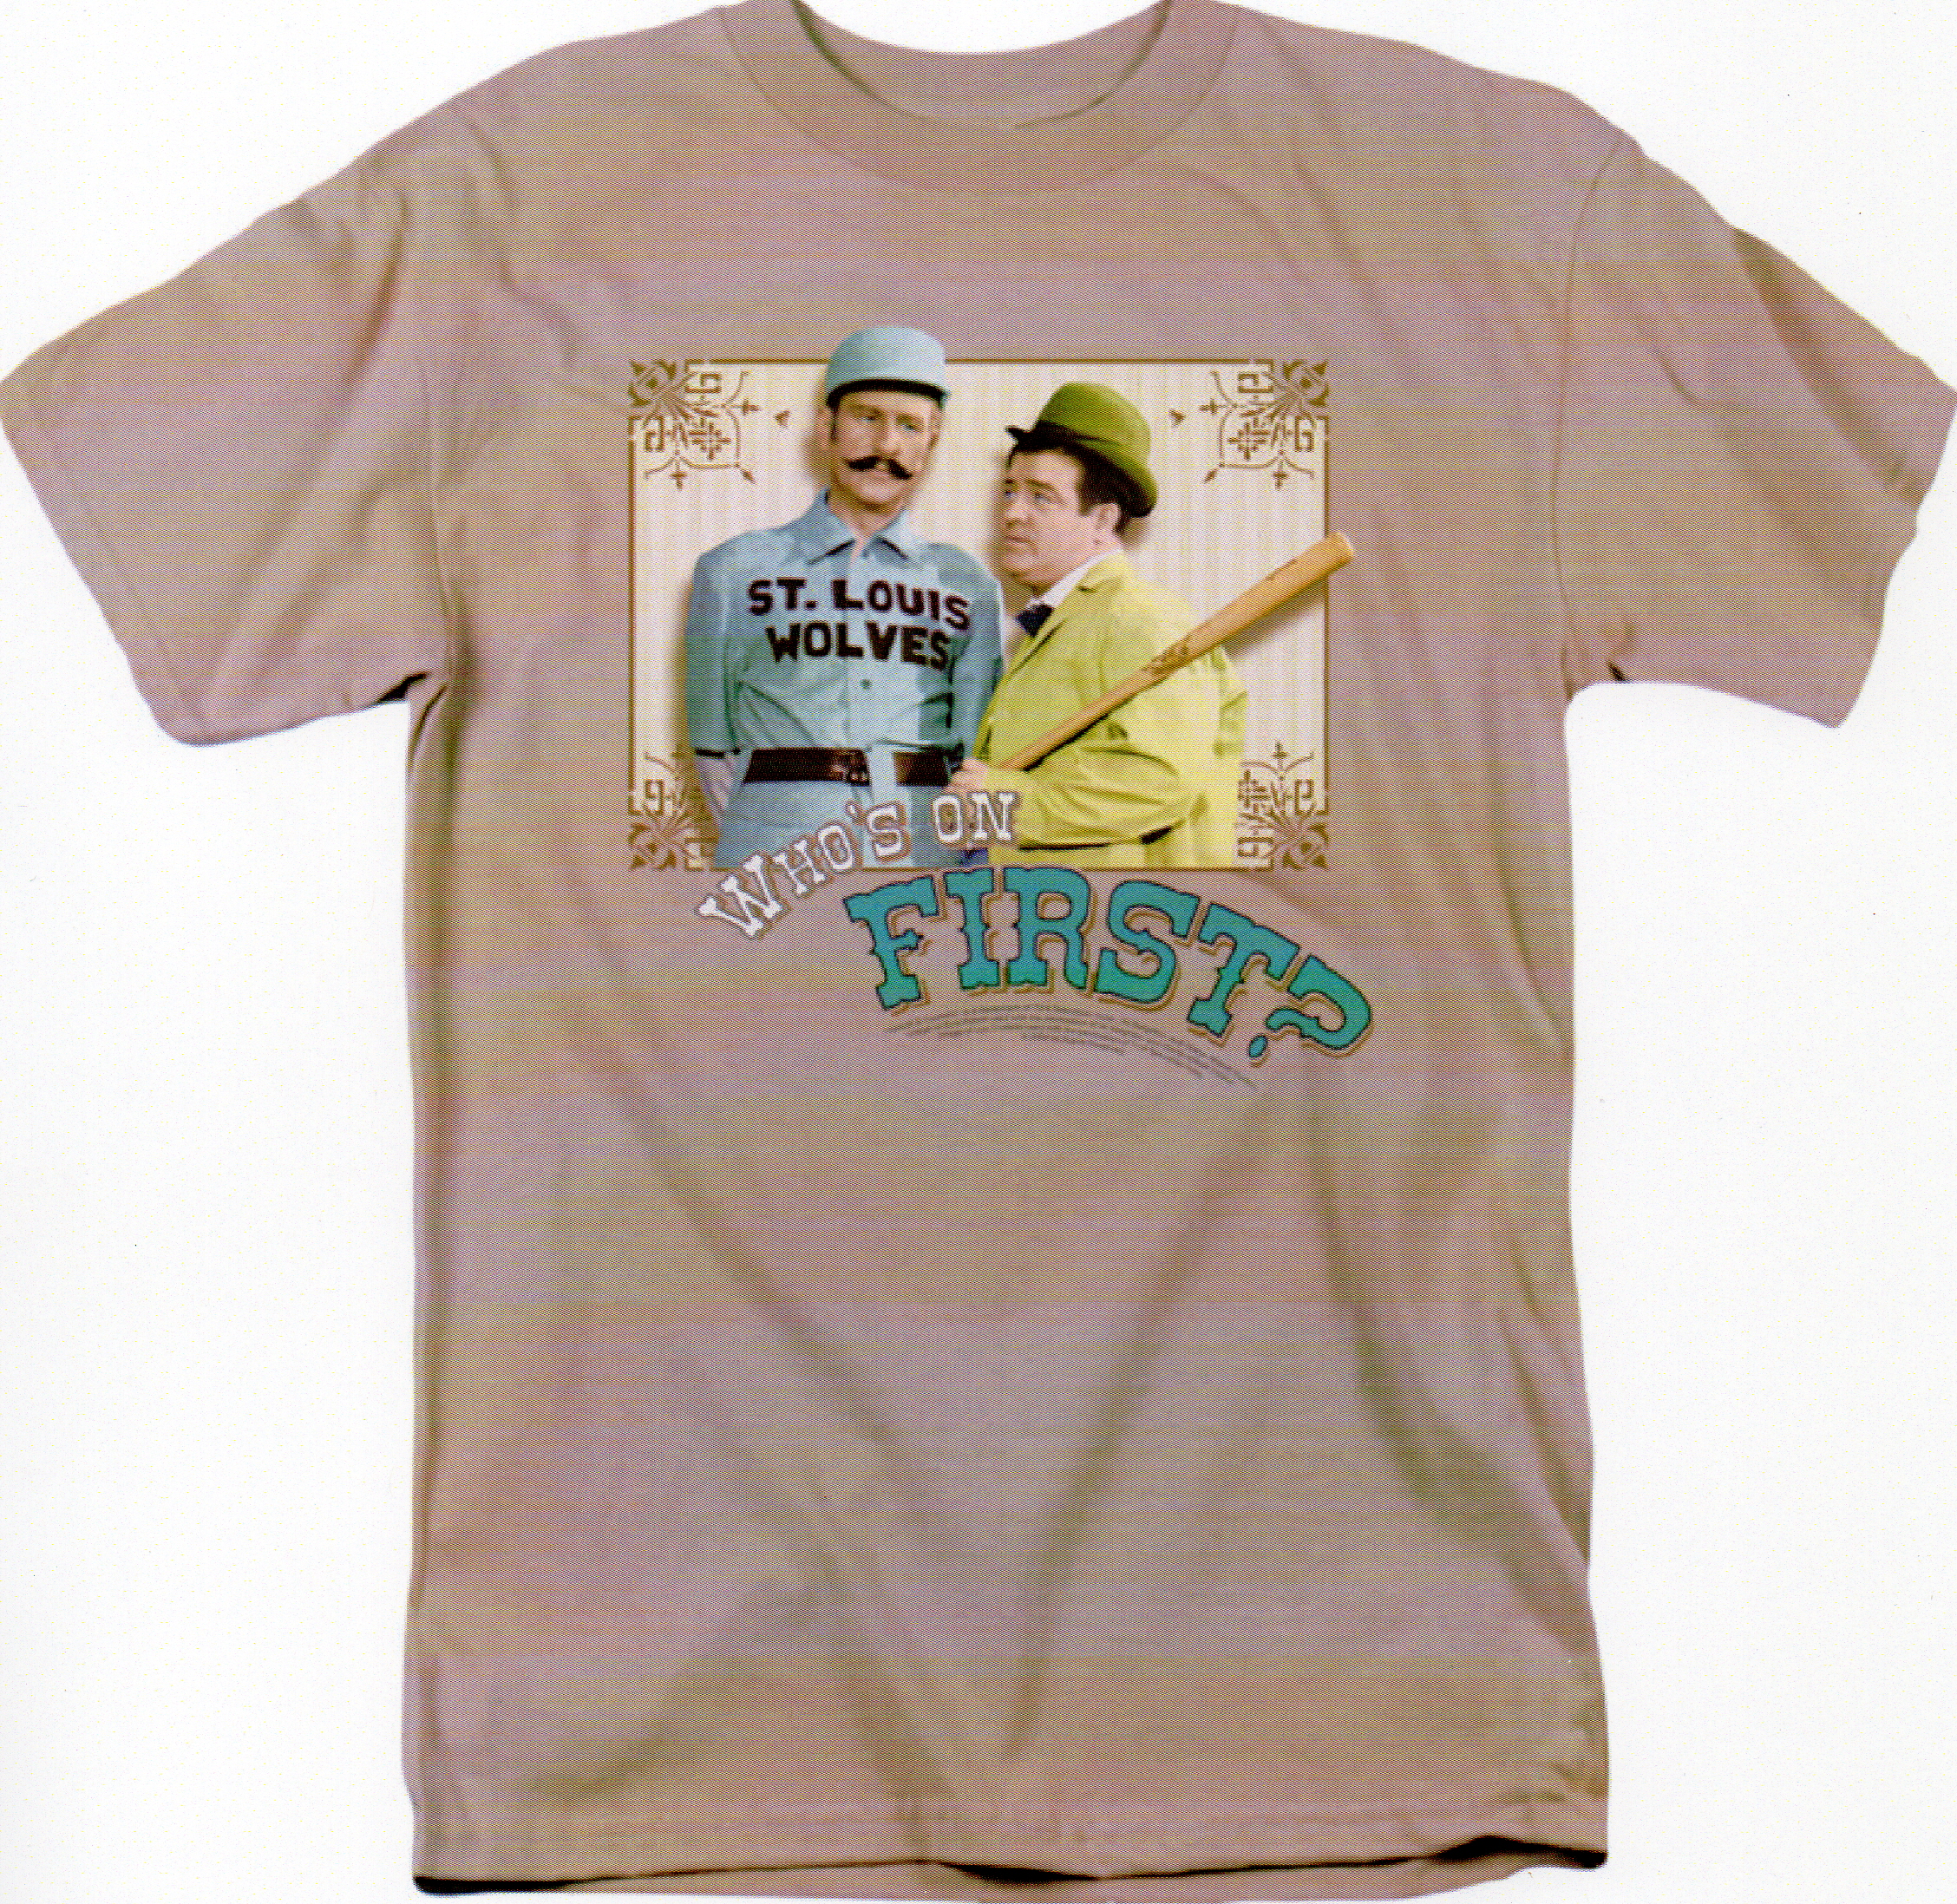 Who's On First? Short Sleeve Tee